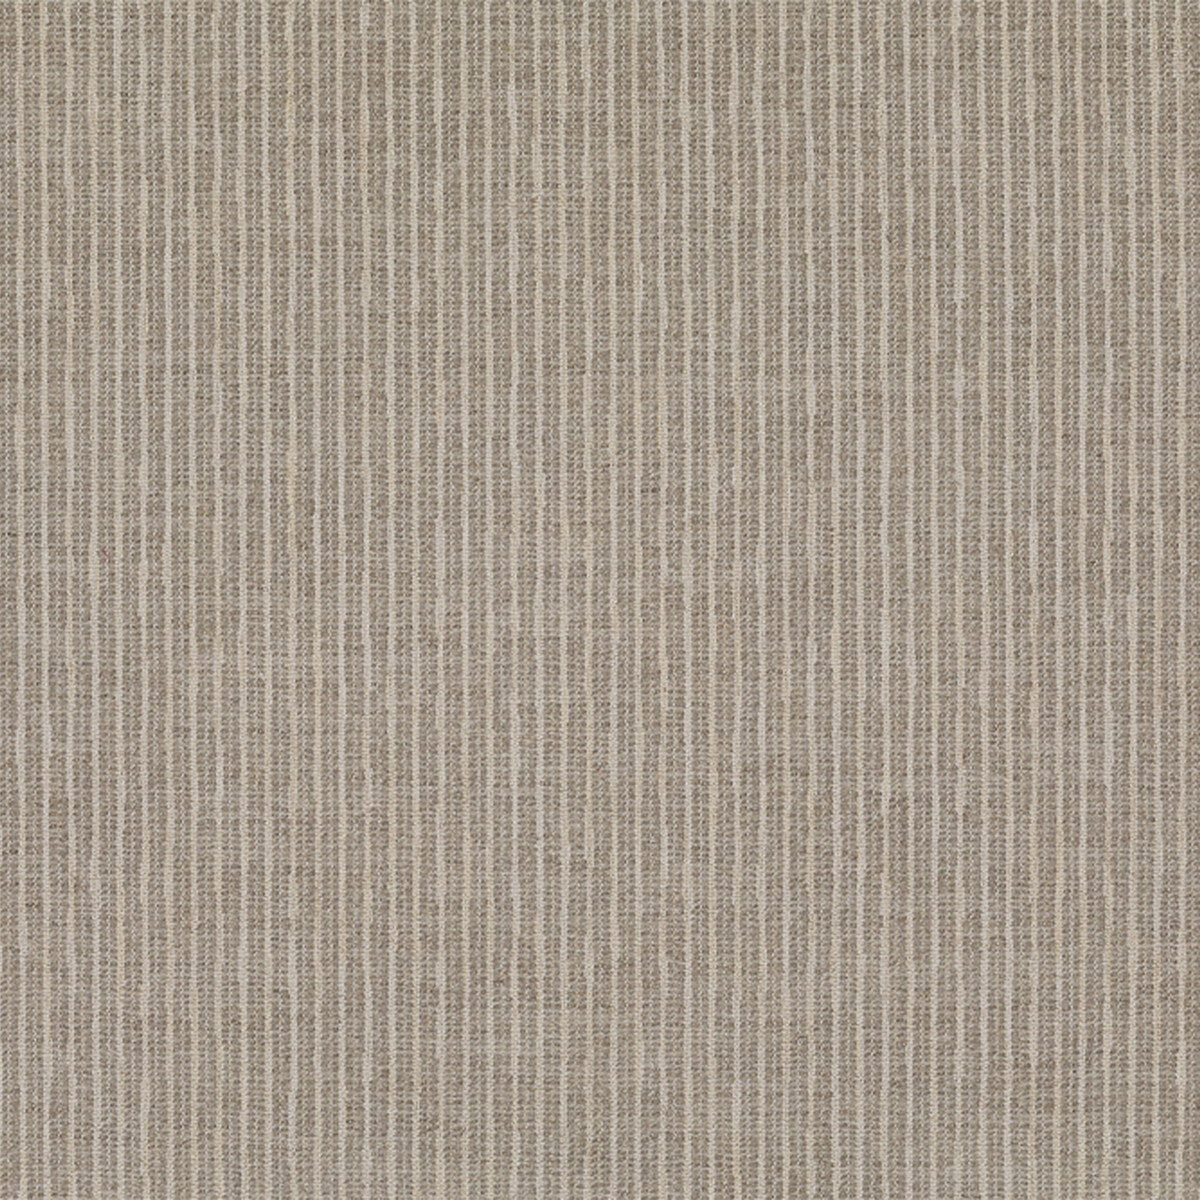 Bailey fabric in wheat color - pattern BFC-3700.16.0 - by Lee Jofa in the Blithfield collection